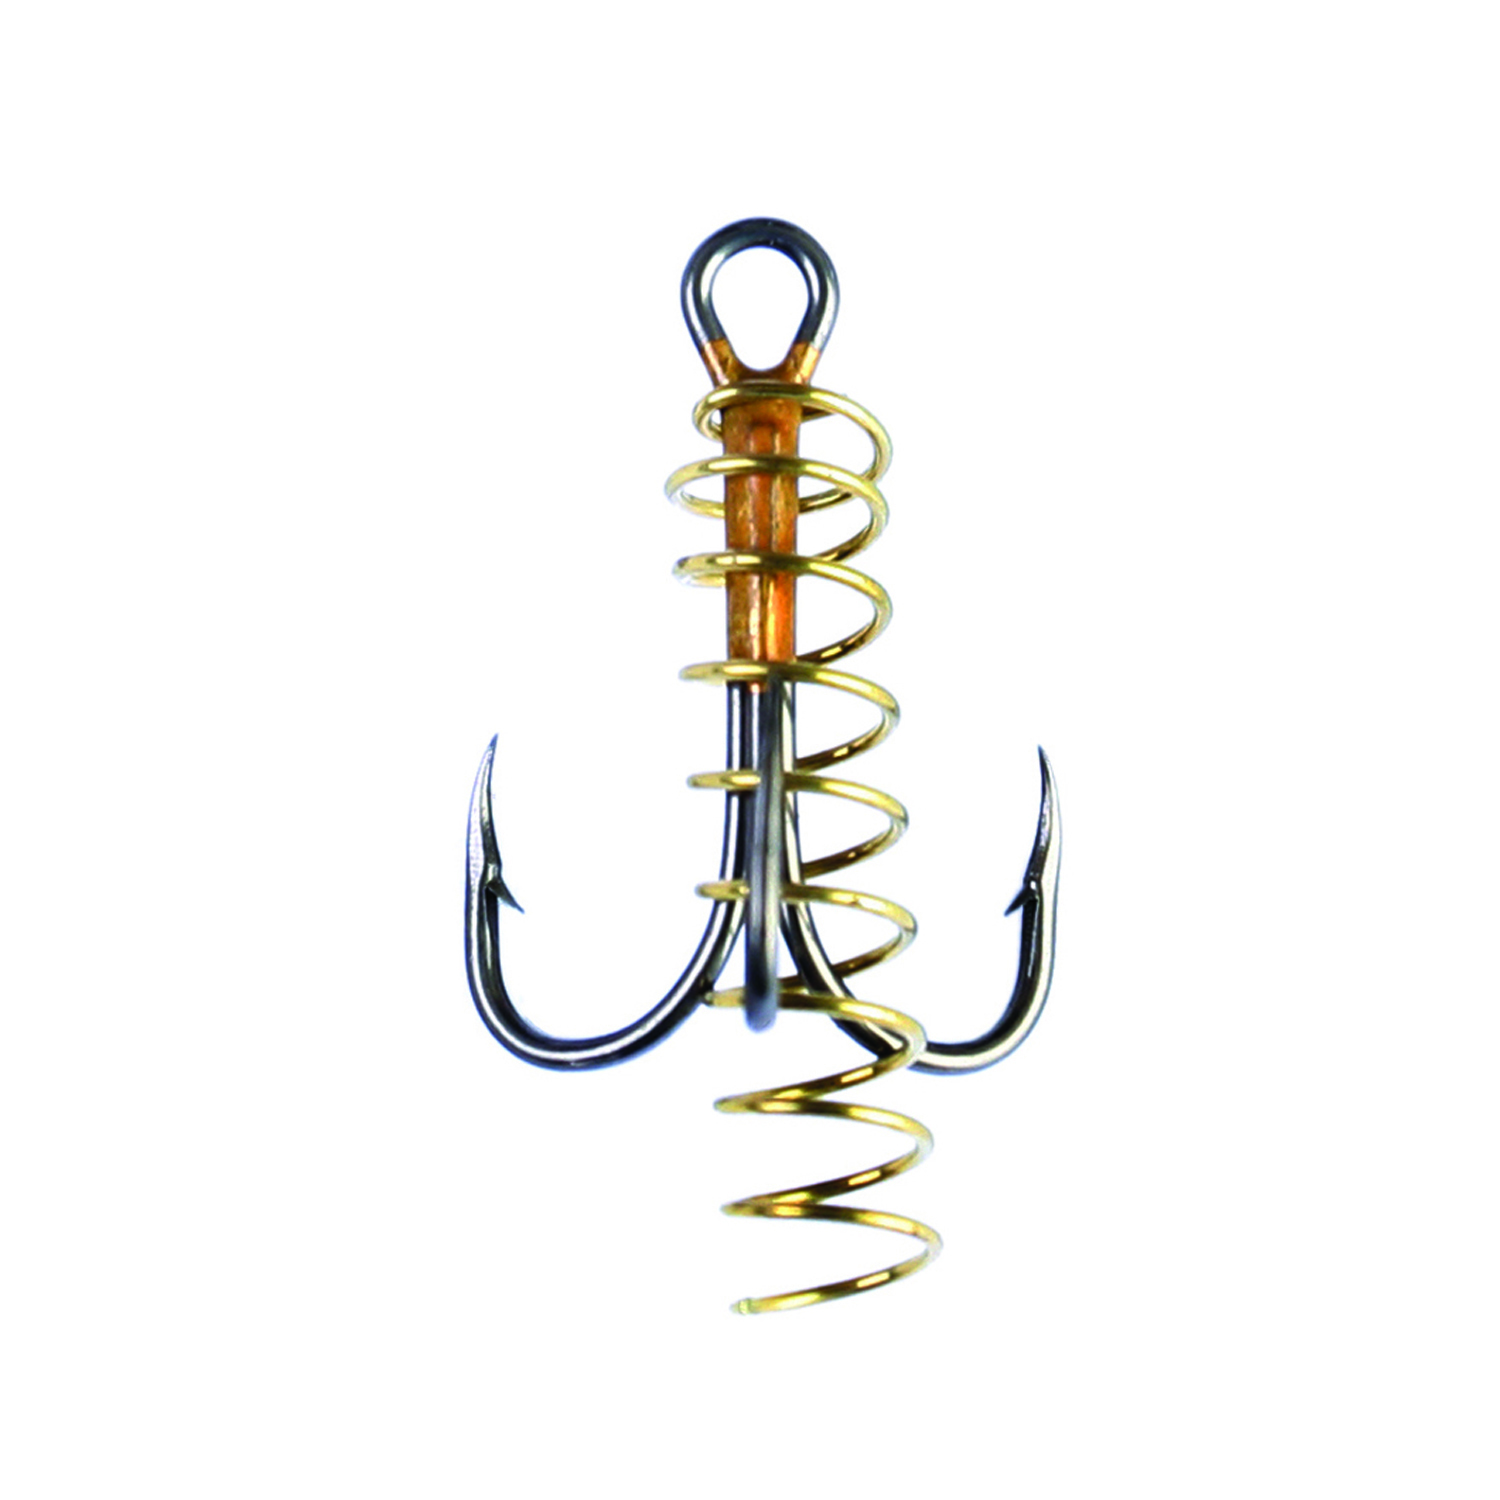 Eagle Claw Soft Bait Hook w/ Spring, Curved Point, 2x Strong